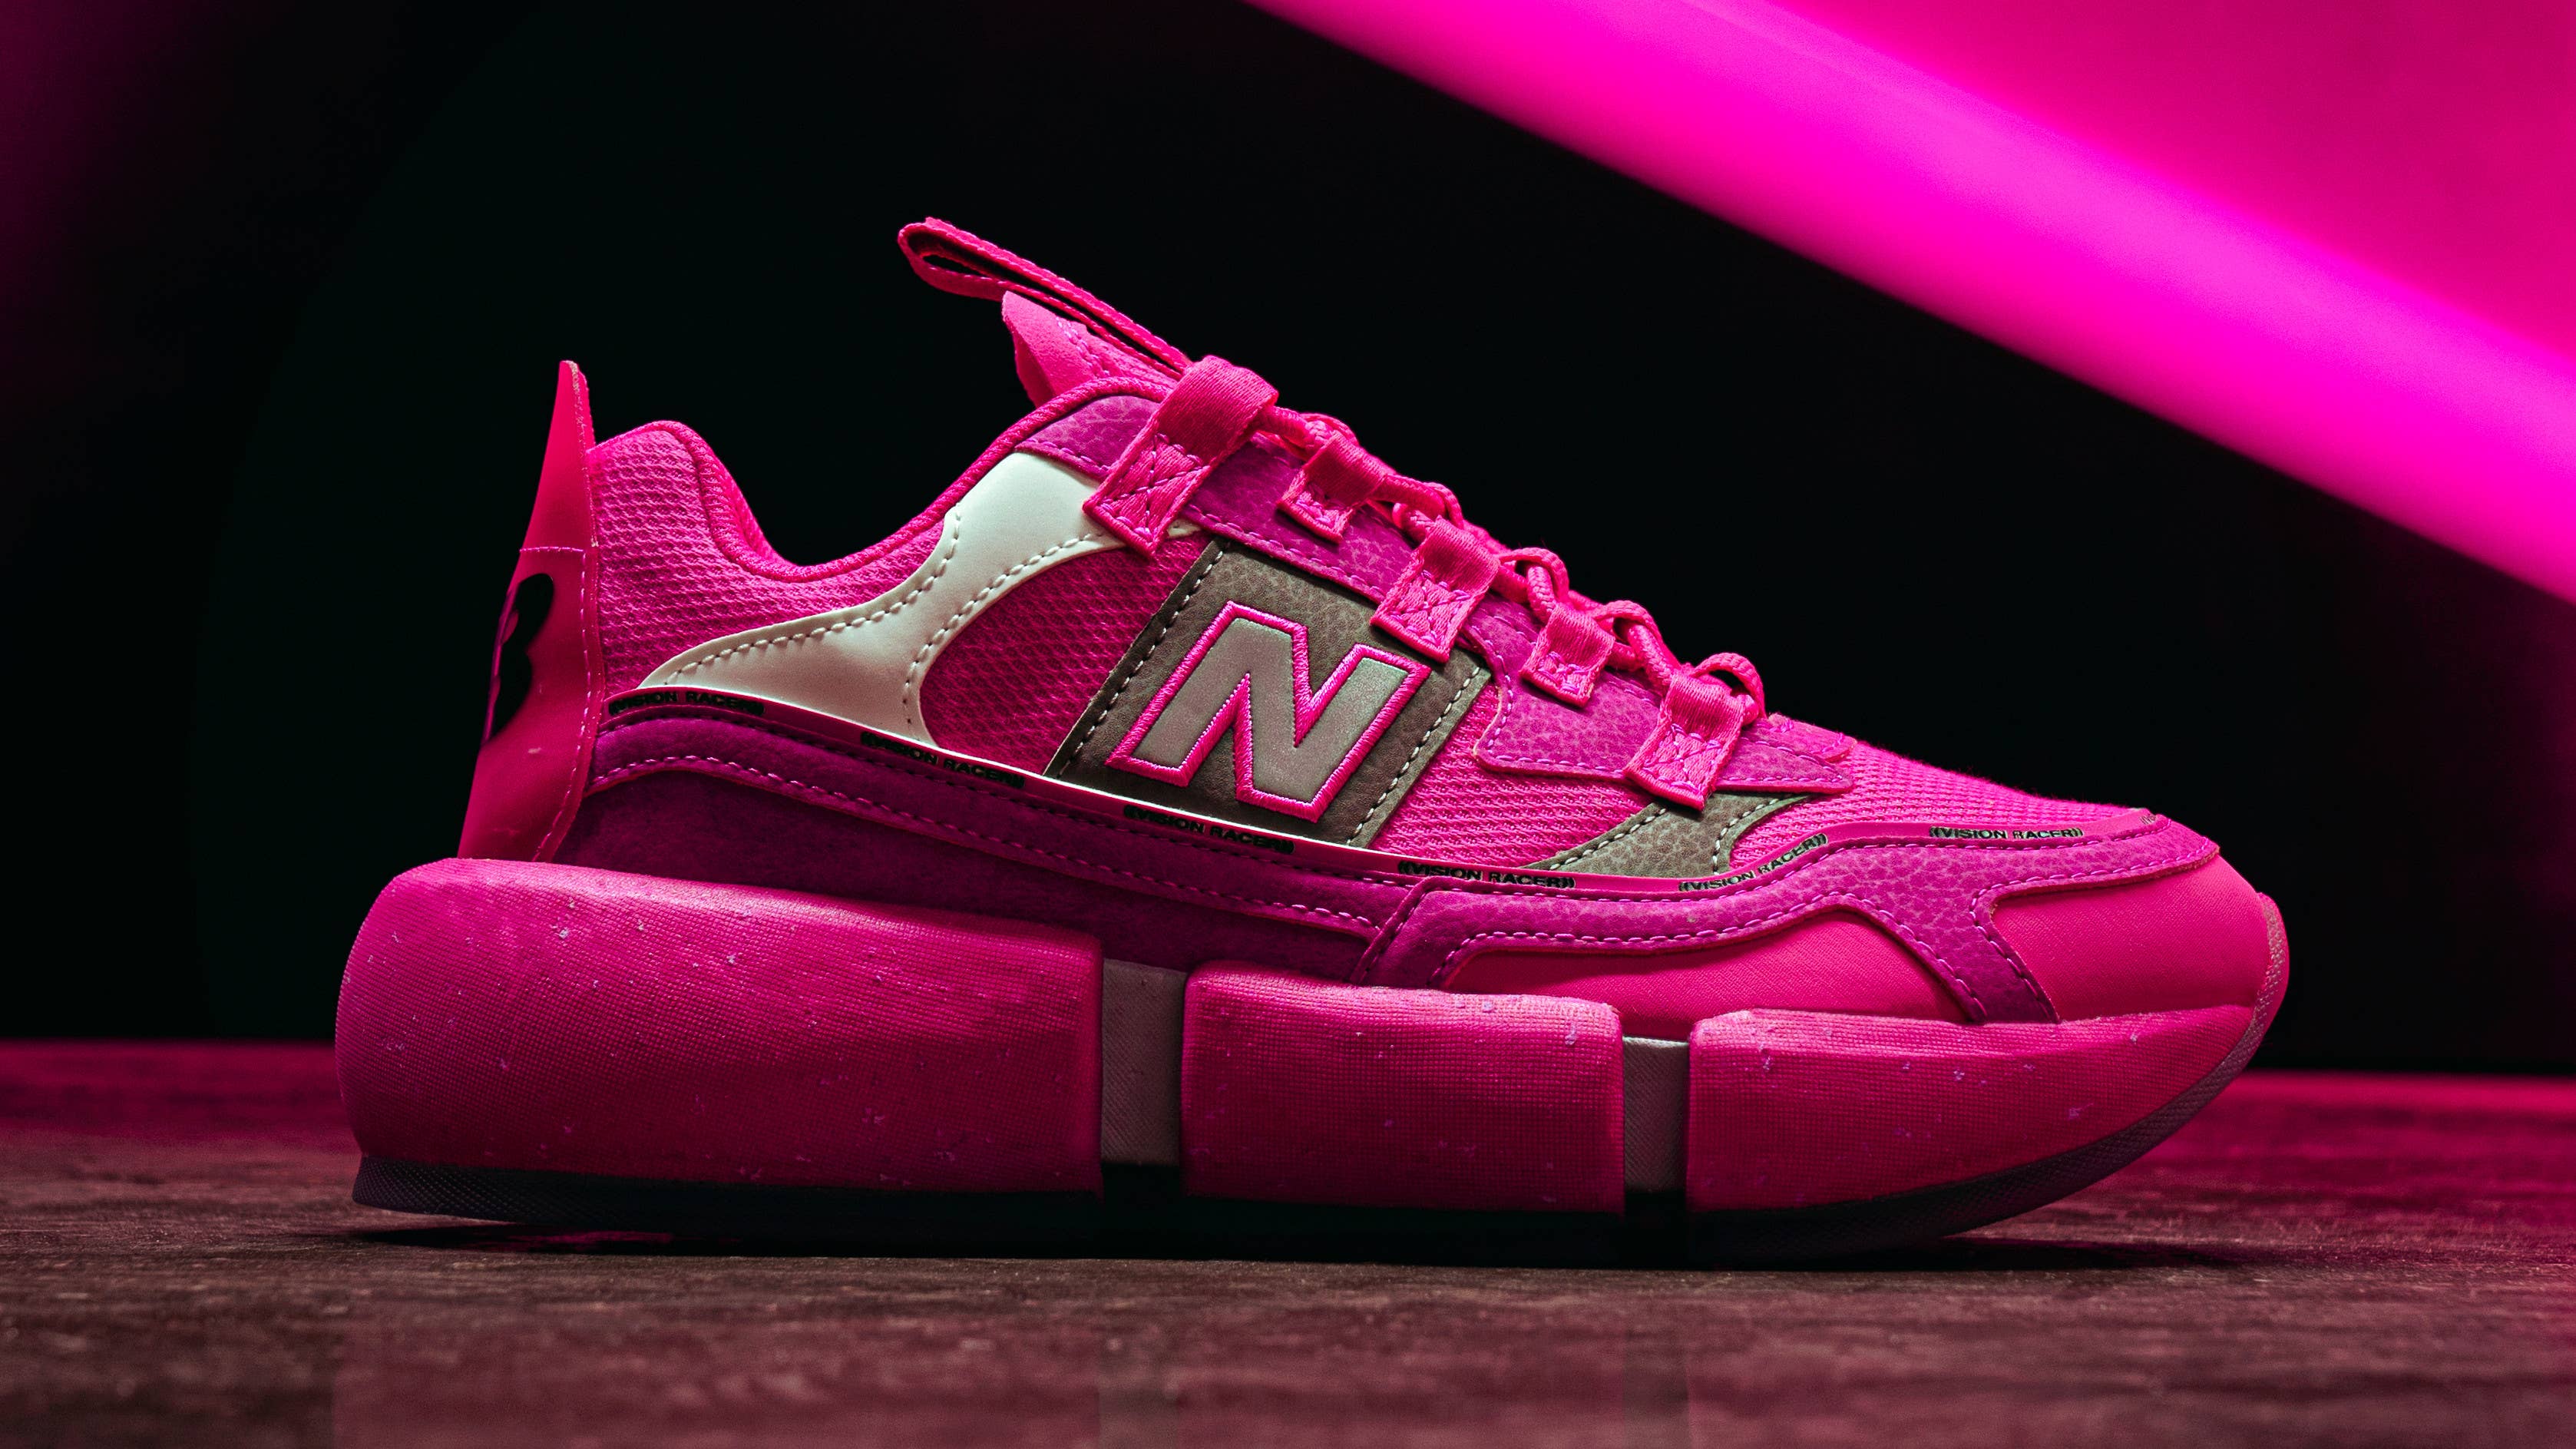 New Balance Jaden Smith Vision Racer Sneakers